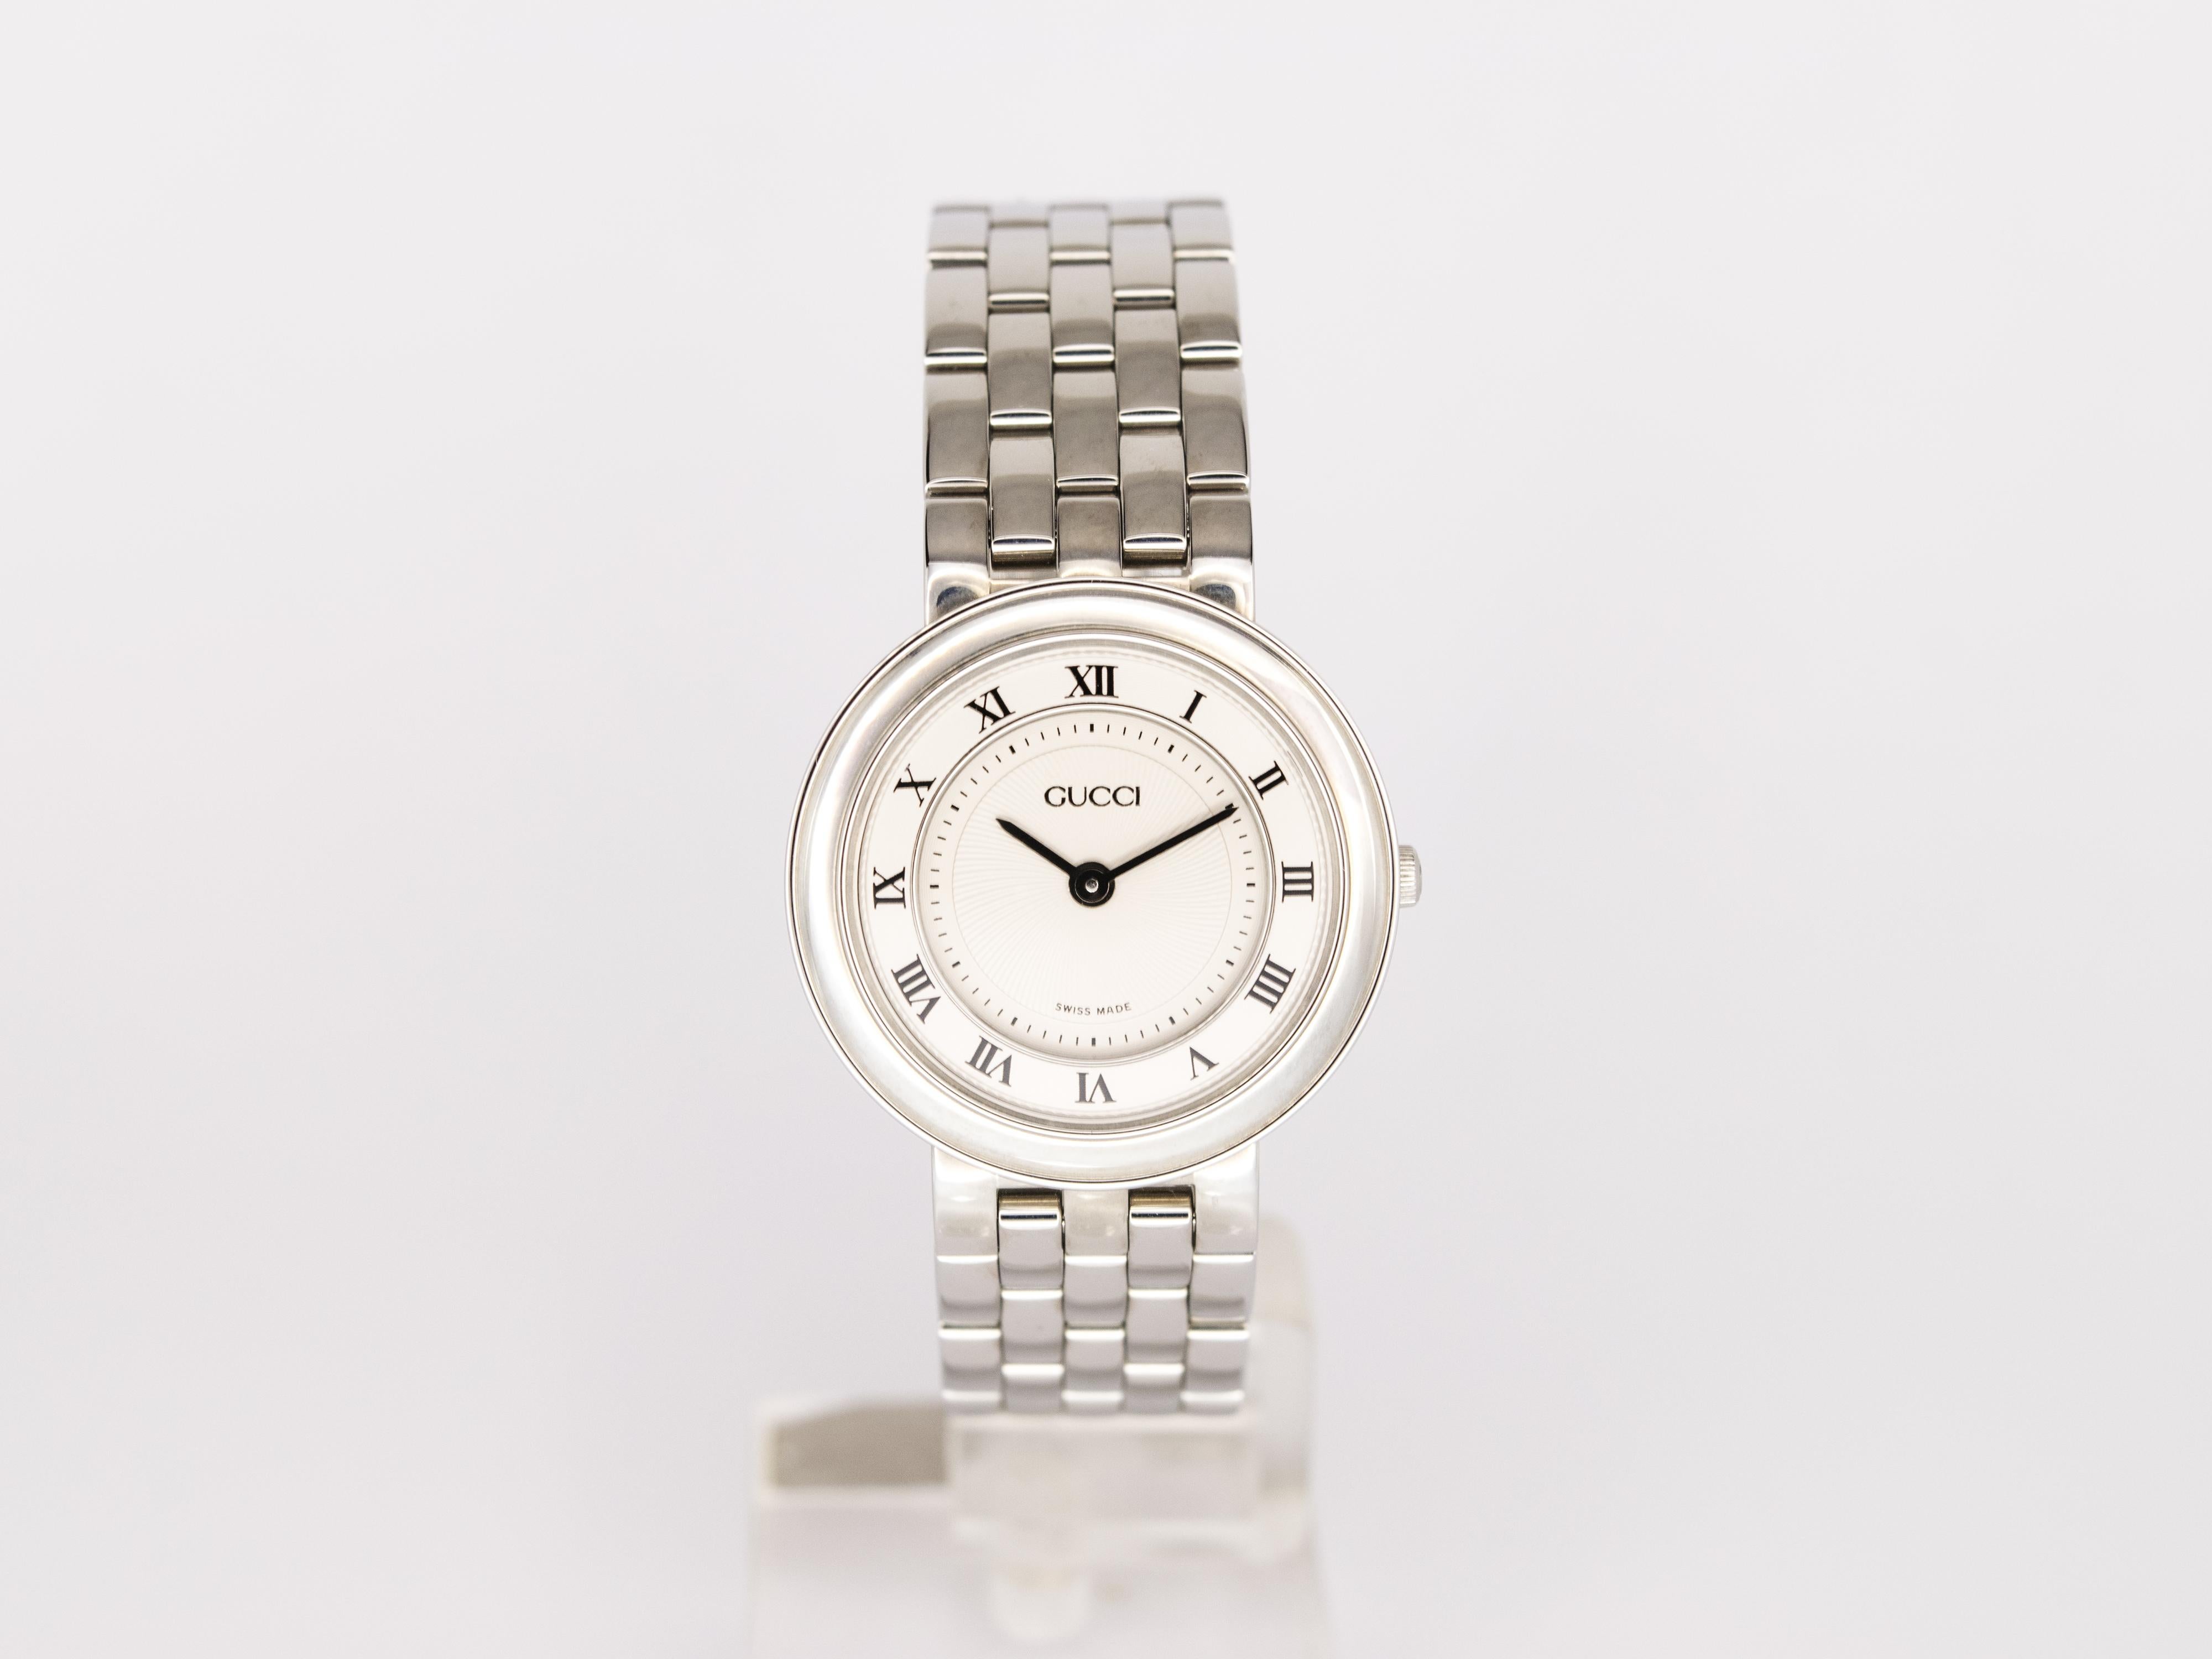 NEW Gucci  lady quartz watch Swiss Made.
The watch comes from an Italian authorized dealer with box and international warranty.
Case diameter mm 26

It fit a white bright dial with black Roman index and a wave texture at the center.

The stainless